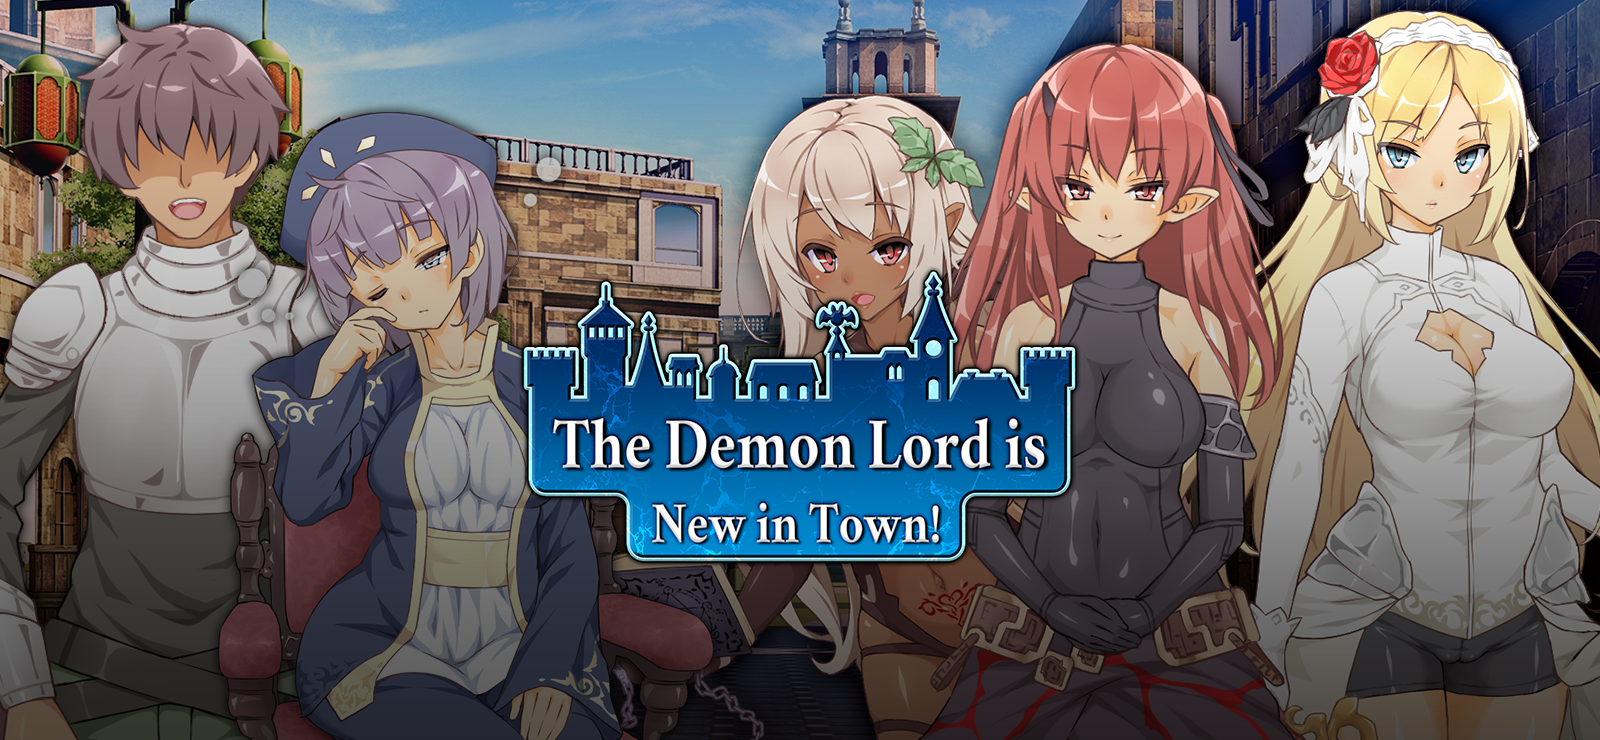 The Demon Lord Is New In Town!